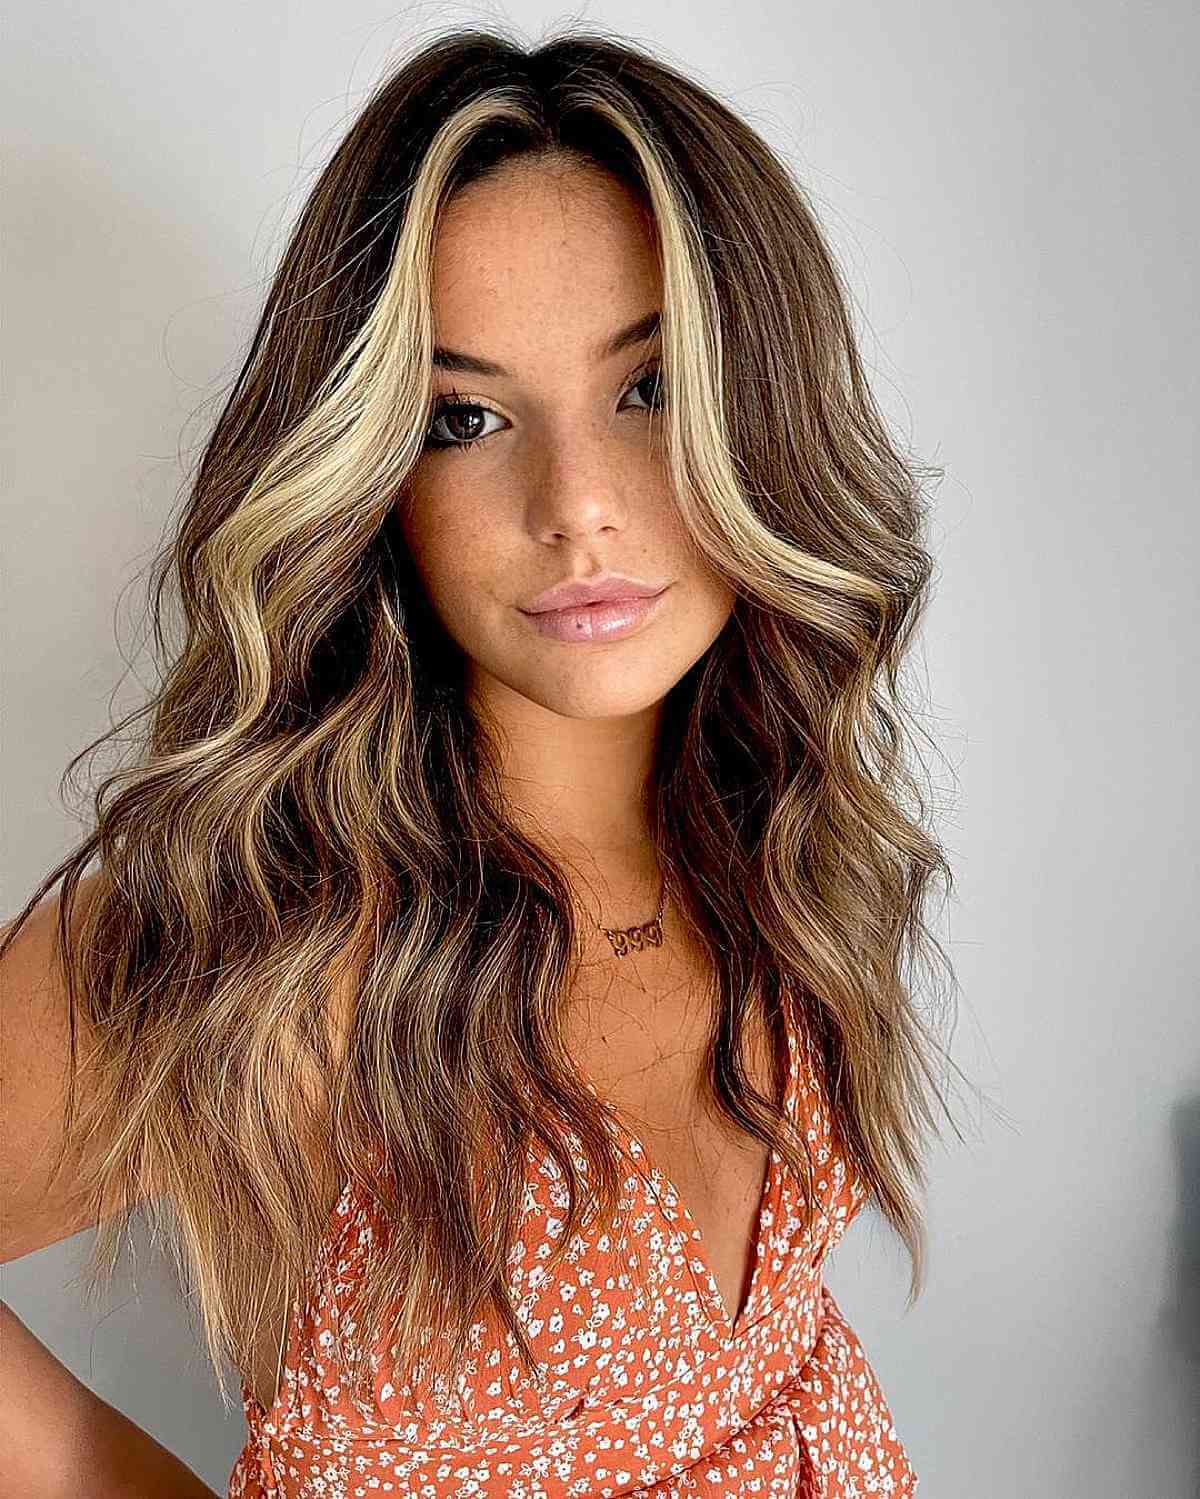 19 Perfect Examples of Lowlights for Brown Hair (2023 Looks)